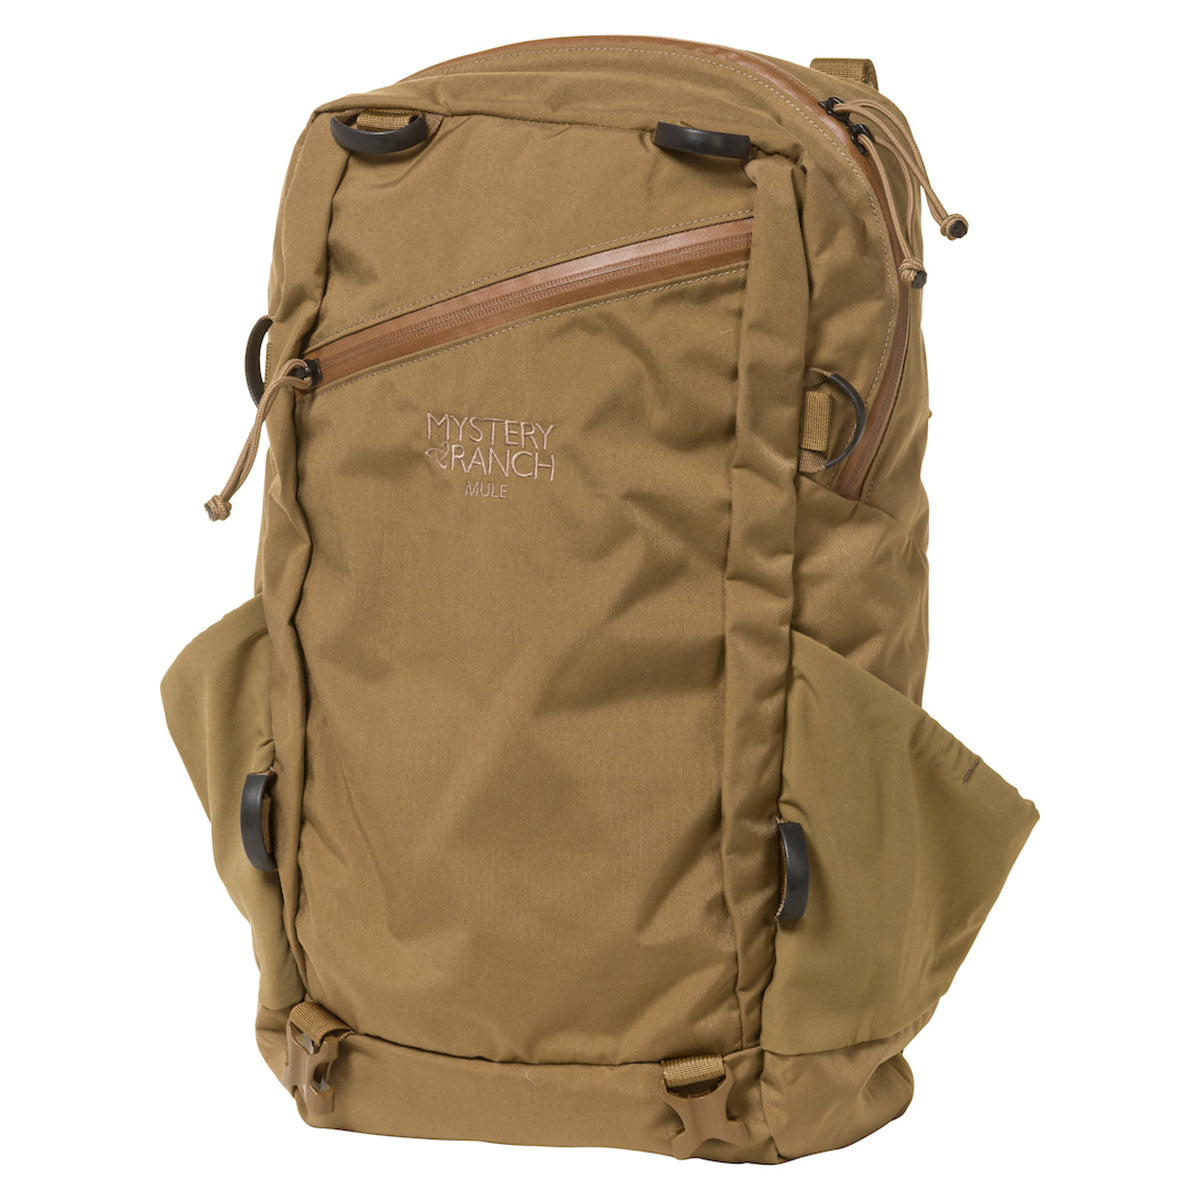 Mystery Ranch Mule Bag Only (2020) by Mystery Ranch | Gear - goHUNT Shop